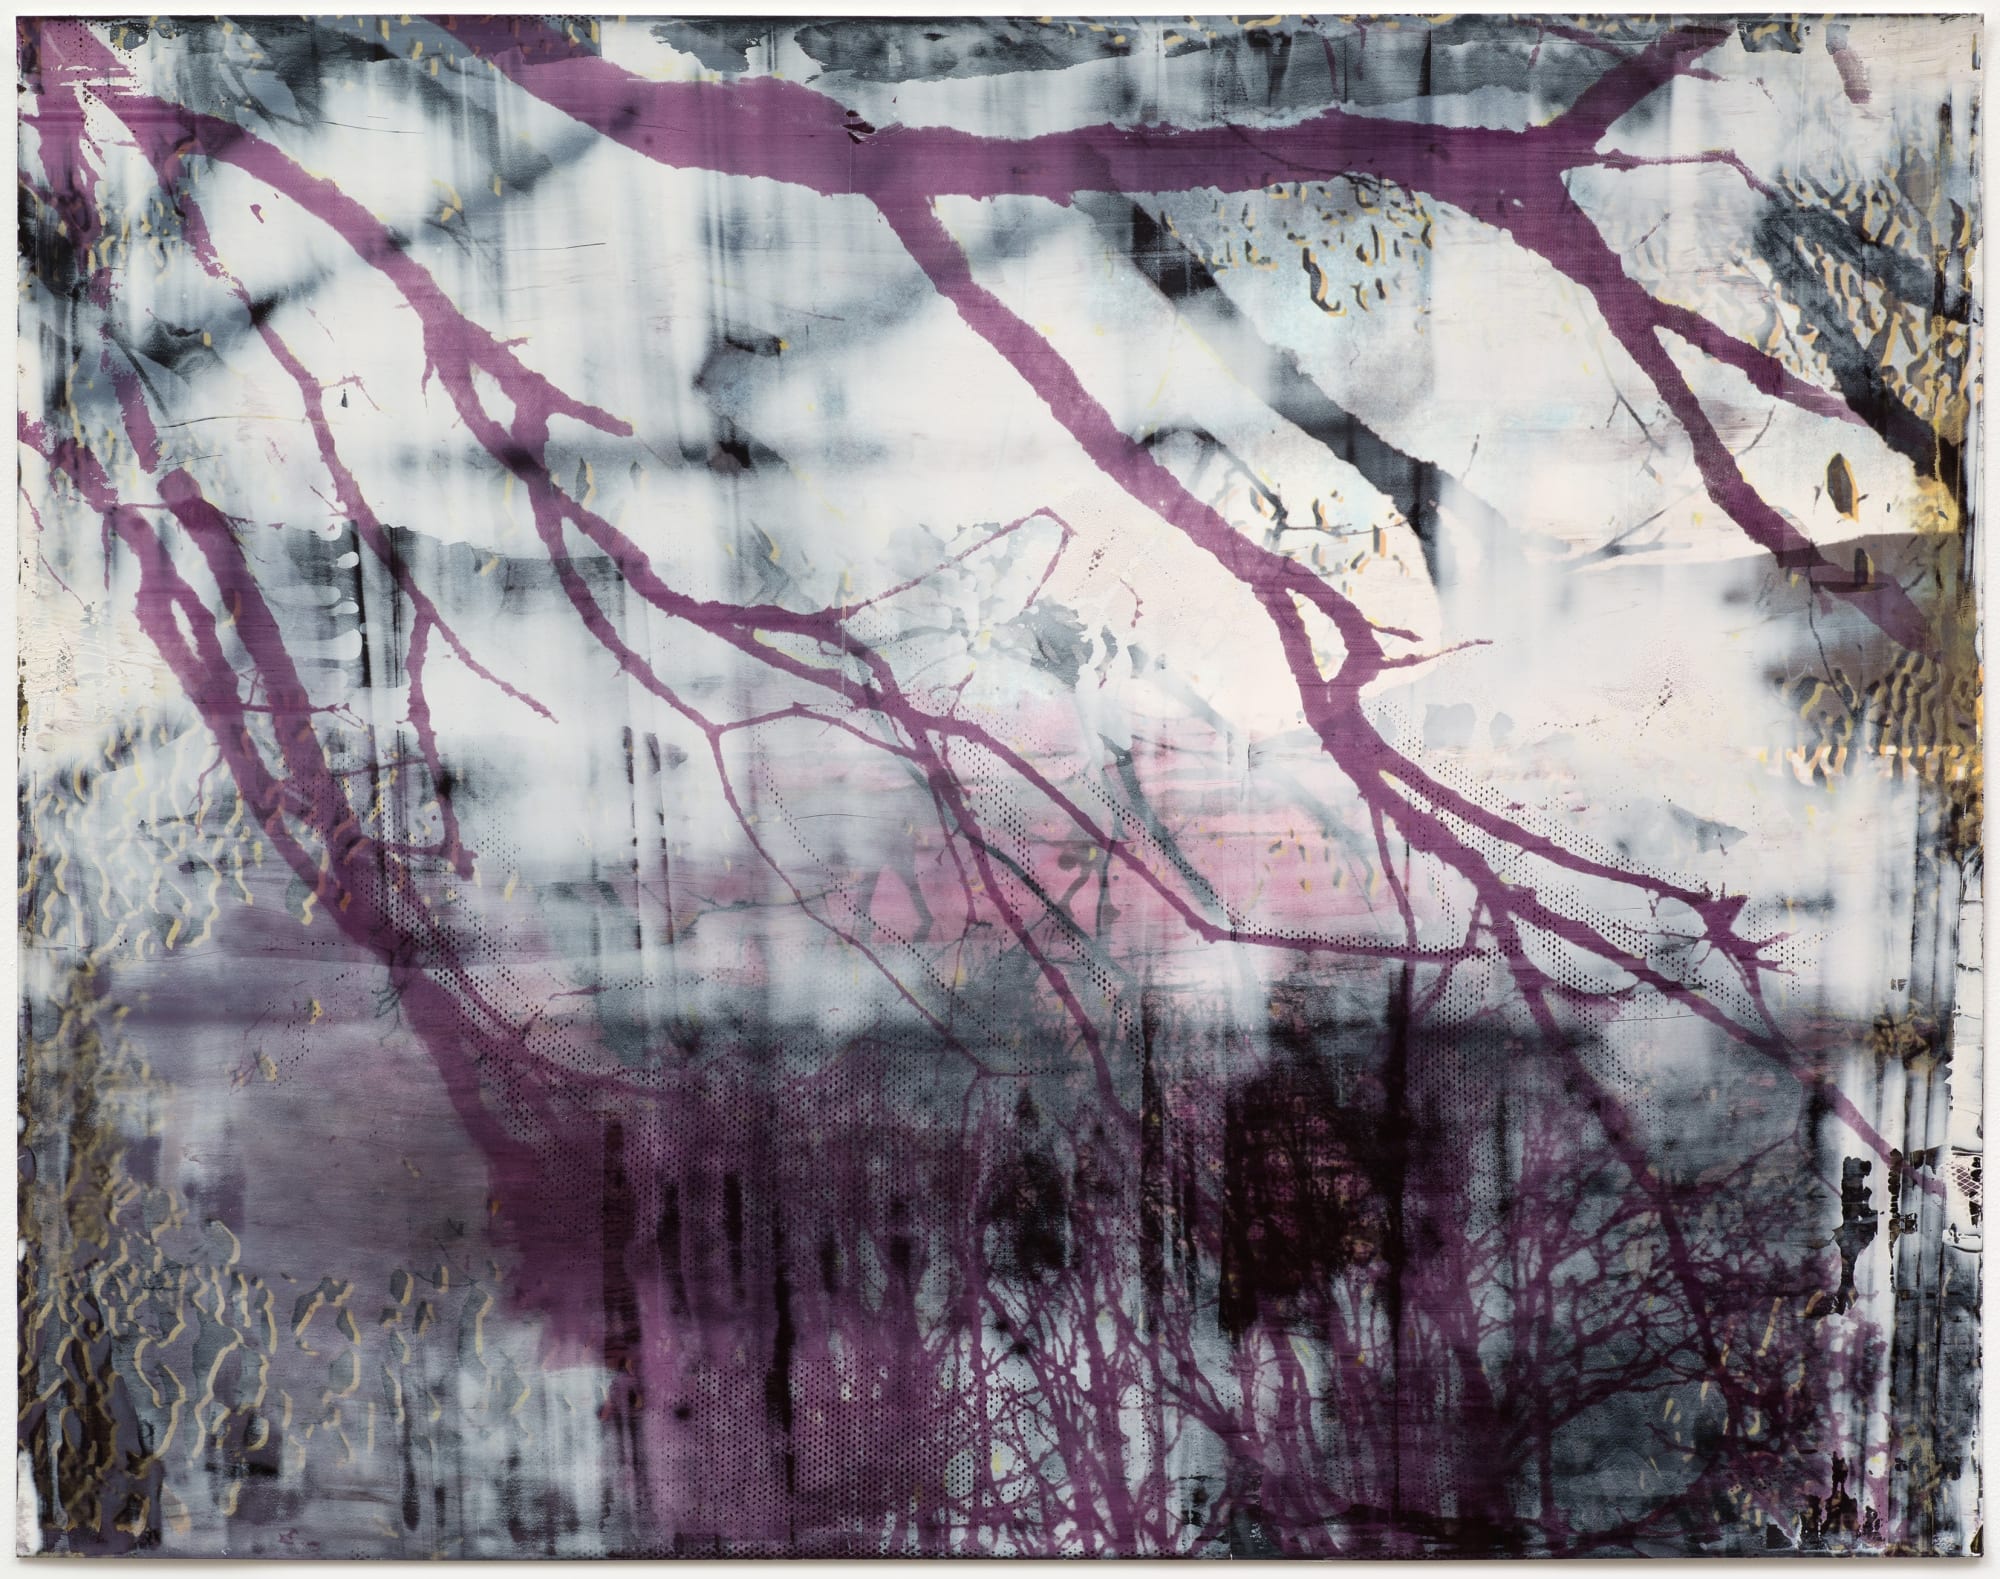 Solo presentation of works by Elizabeth Magill at Lucent, Piccadilly London